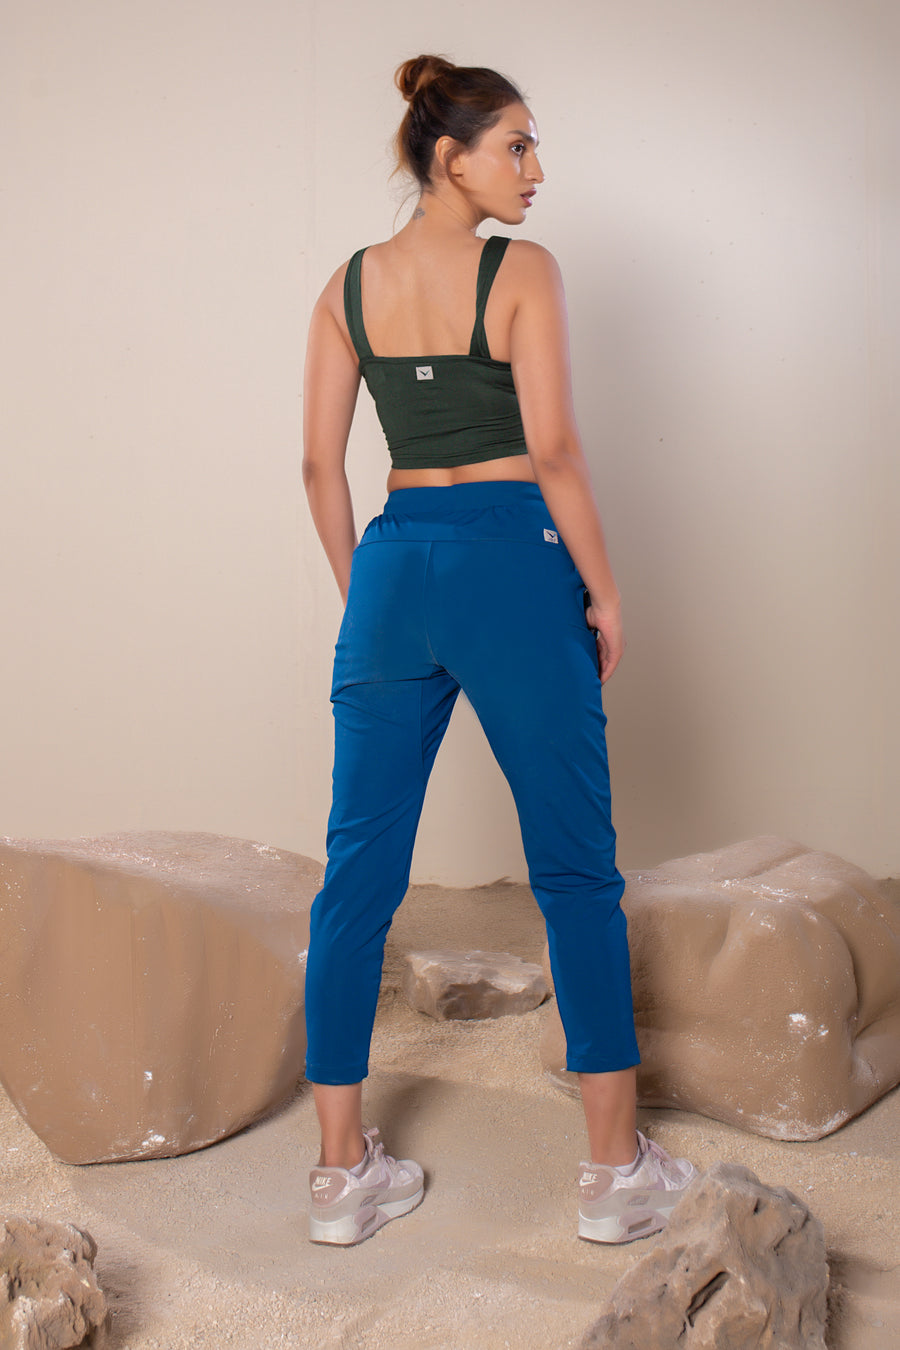 Women's Vera Crop in Dark Green | VOLO Apparel | The perfect athletic crop top made with a four way stretch bamboo fiber blend. Double lined and naturally odor resistant and antimicrobial. The Vera bamboo crop is reinforced stitched, the bamboo fiber comes with its own climate control properties, making the tops more breathable in the heat and more insulating in the cold.